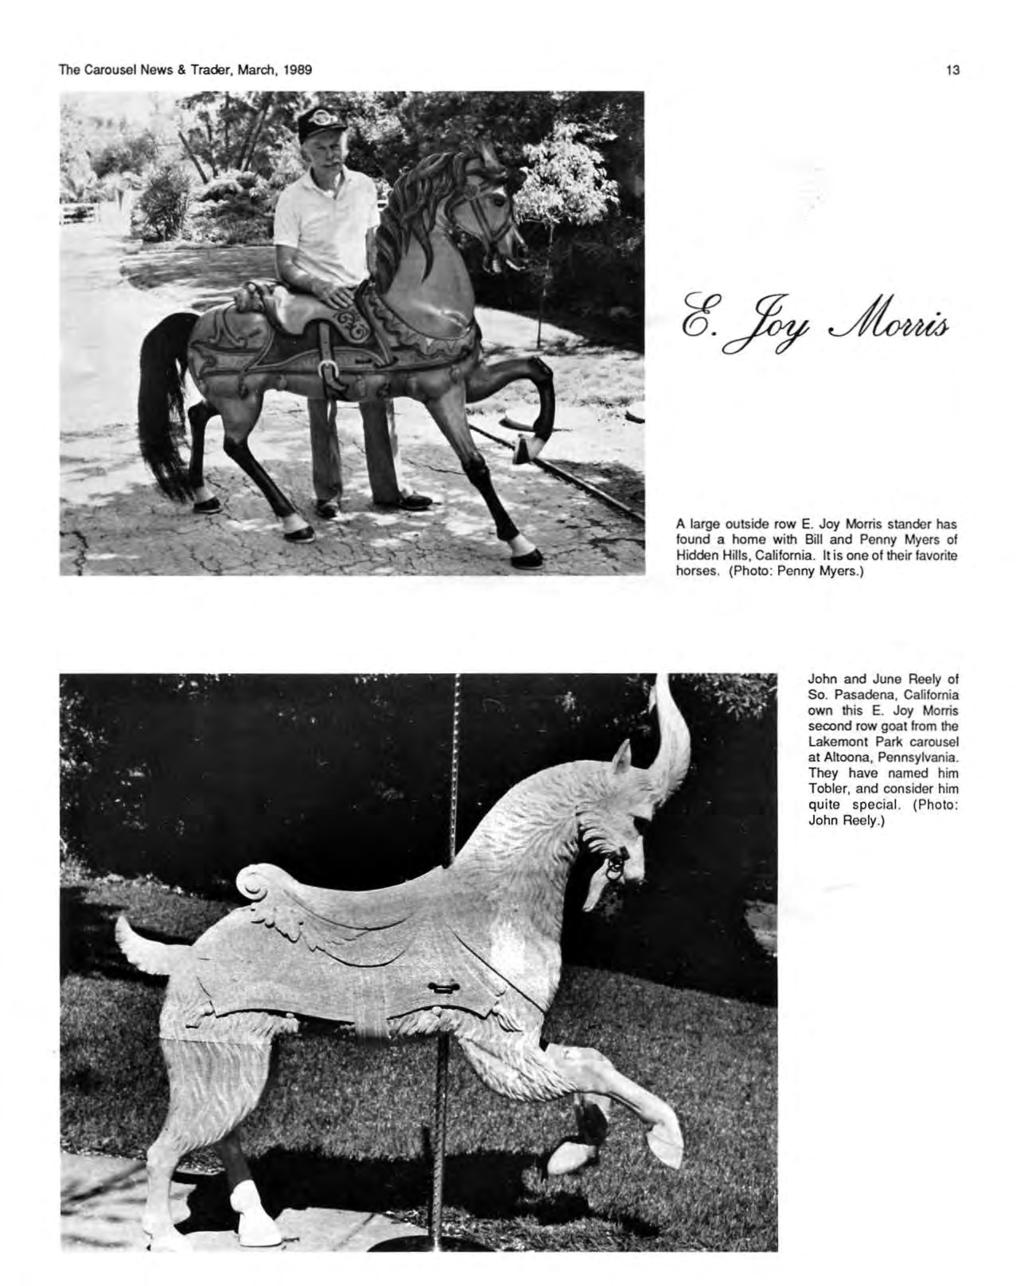 The Carousel News & Trader, March, 1989 13 A large outside row E. Joy Morris slander has found a home with Bill and Penny Myers of Hidden Hills, California. It is one of their favorite horses.